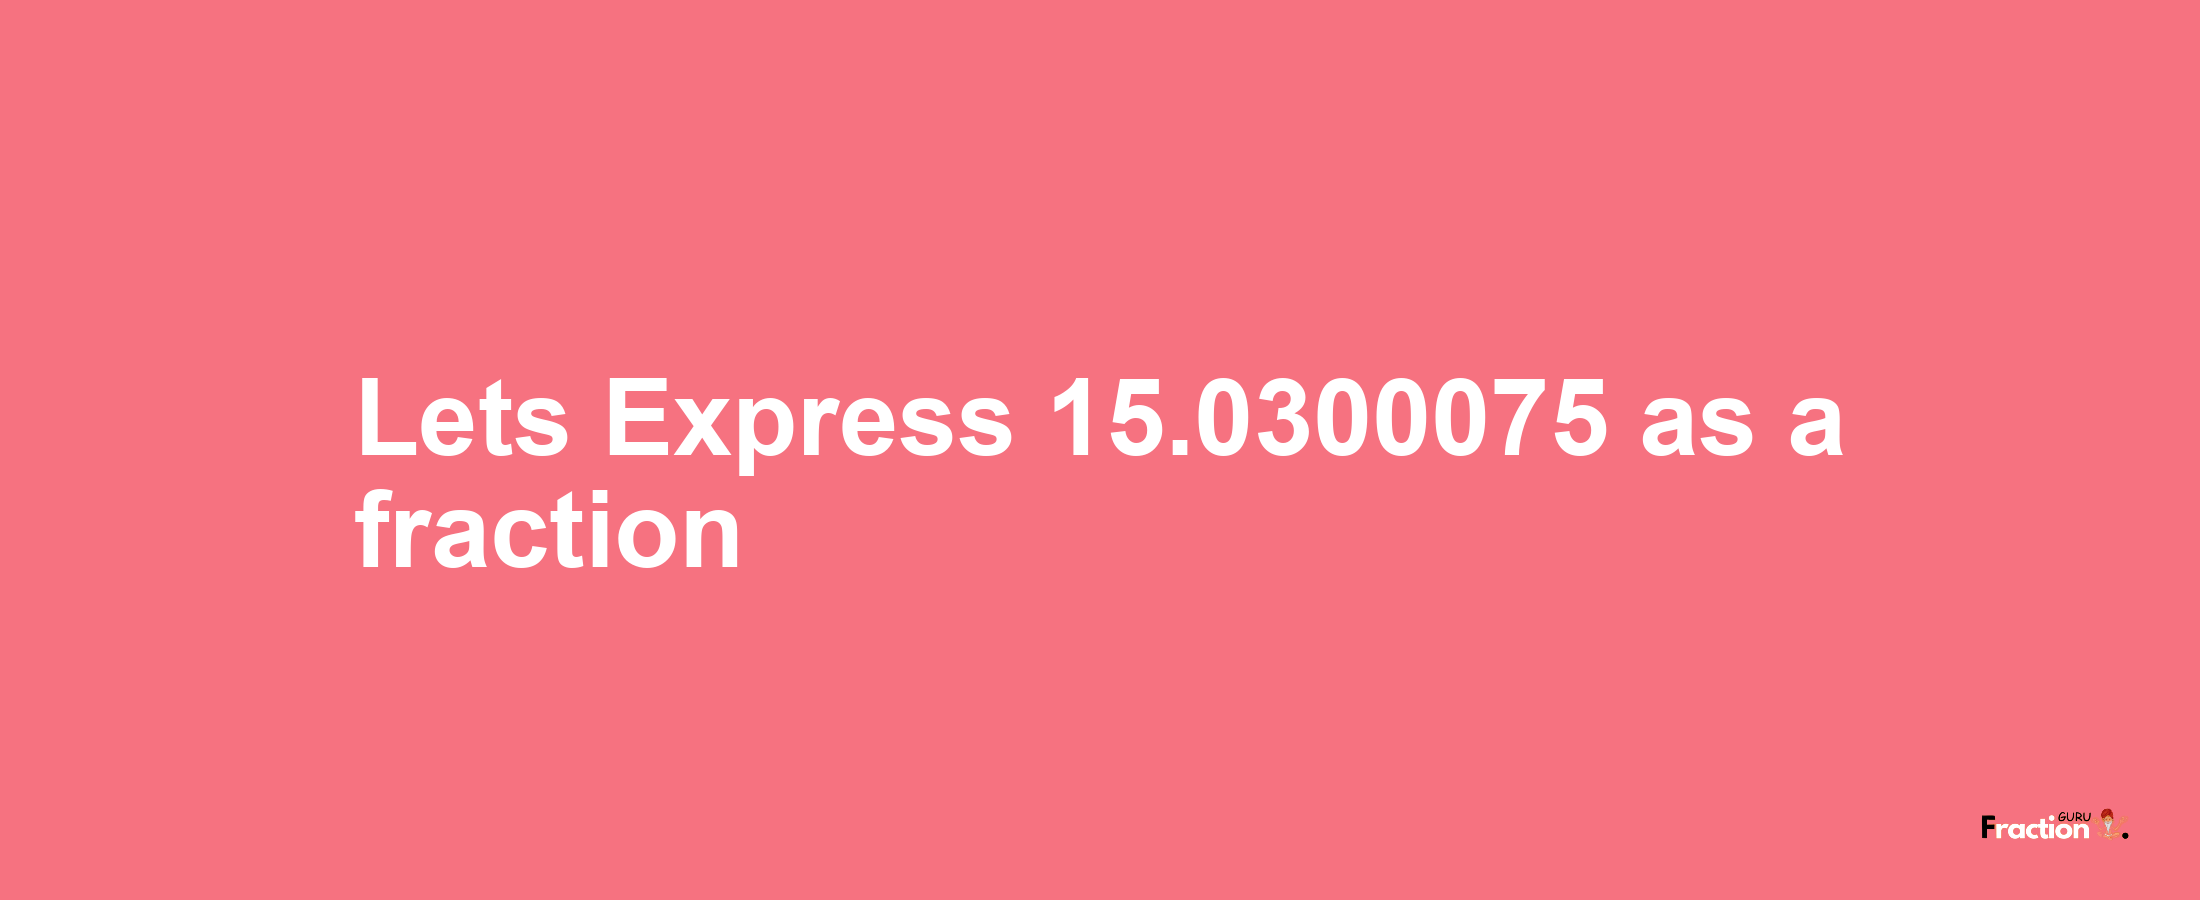 Lets Express 15.0300075 as afraction